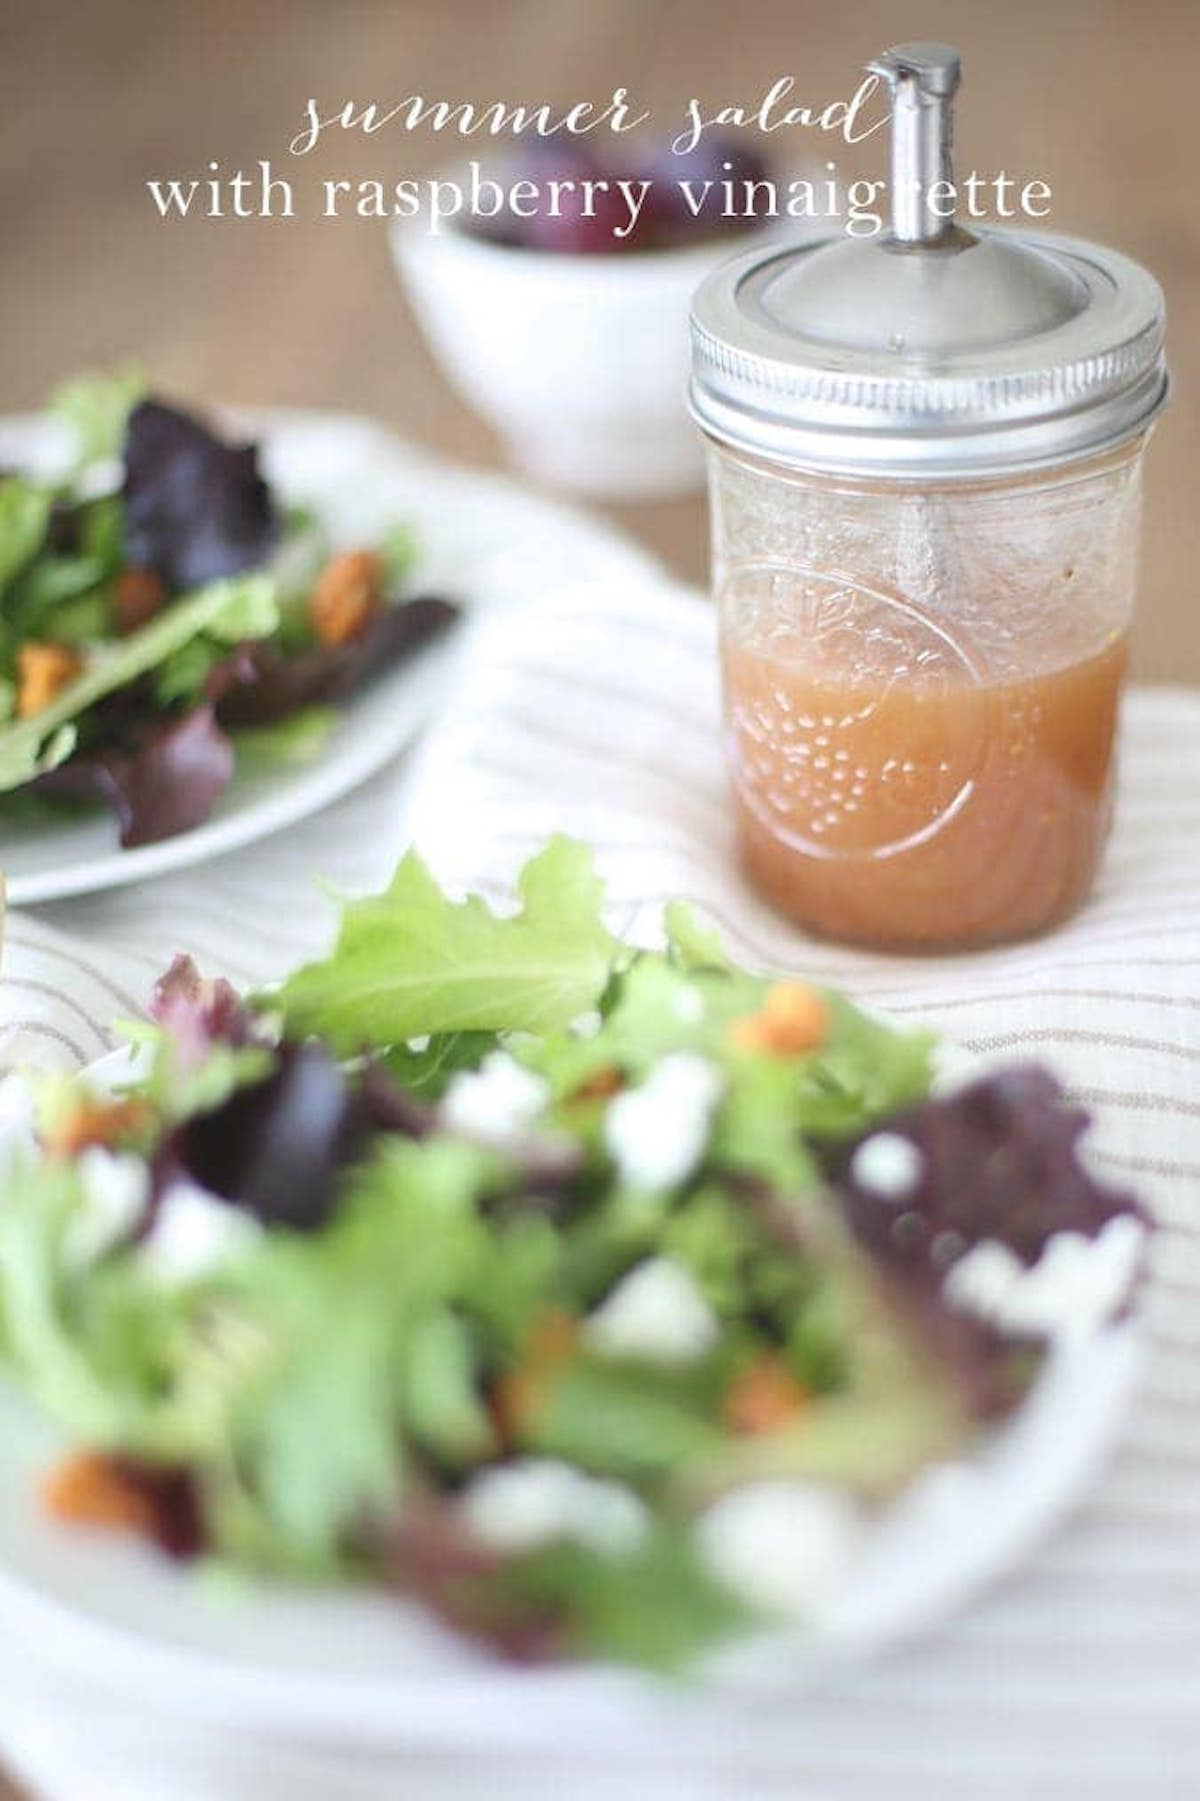 A salad with raspberry vinaigrette and a glass of juice.